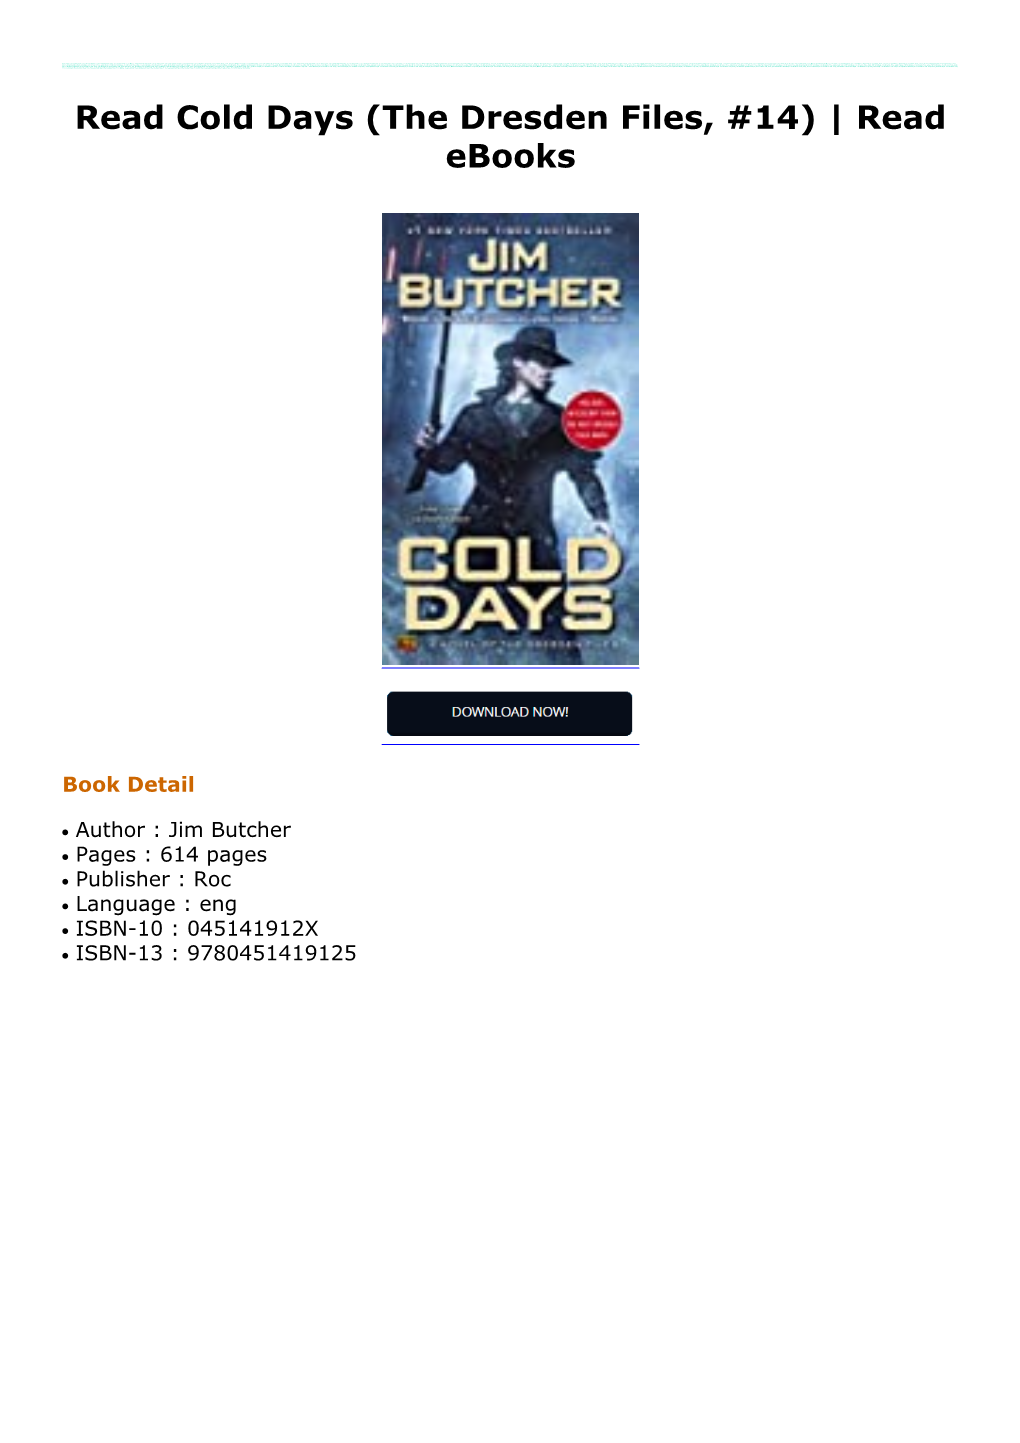 Read Cold Days (The Dresden Files, #14)